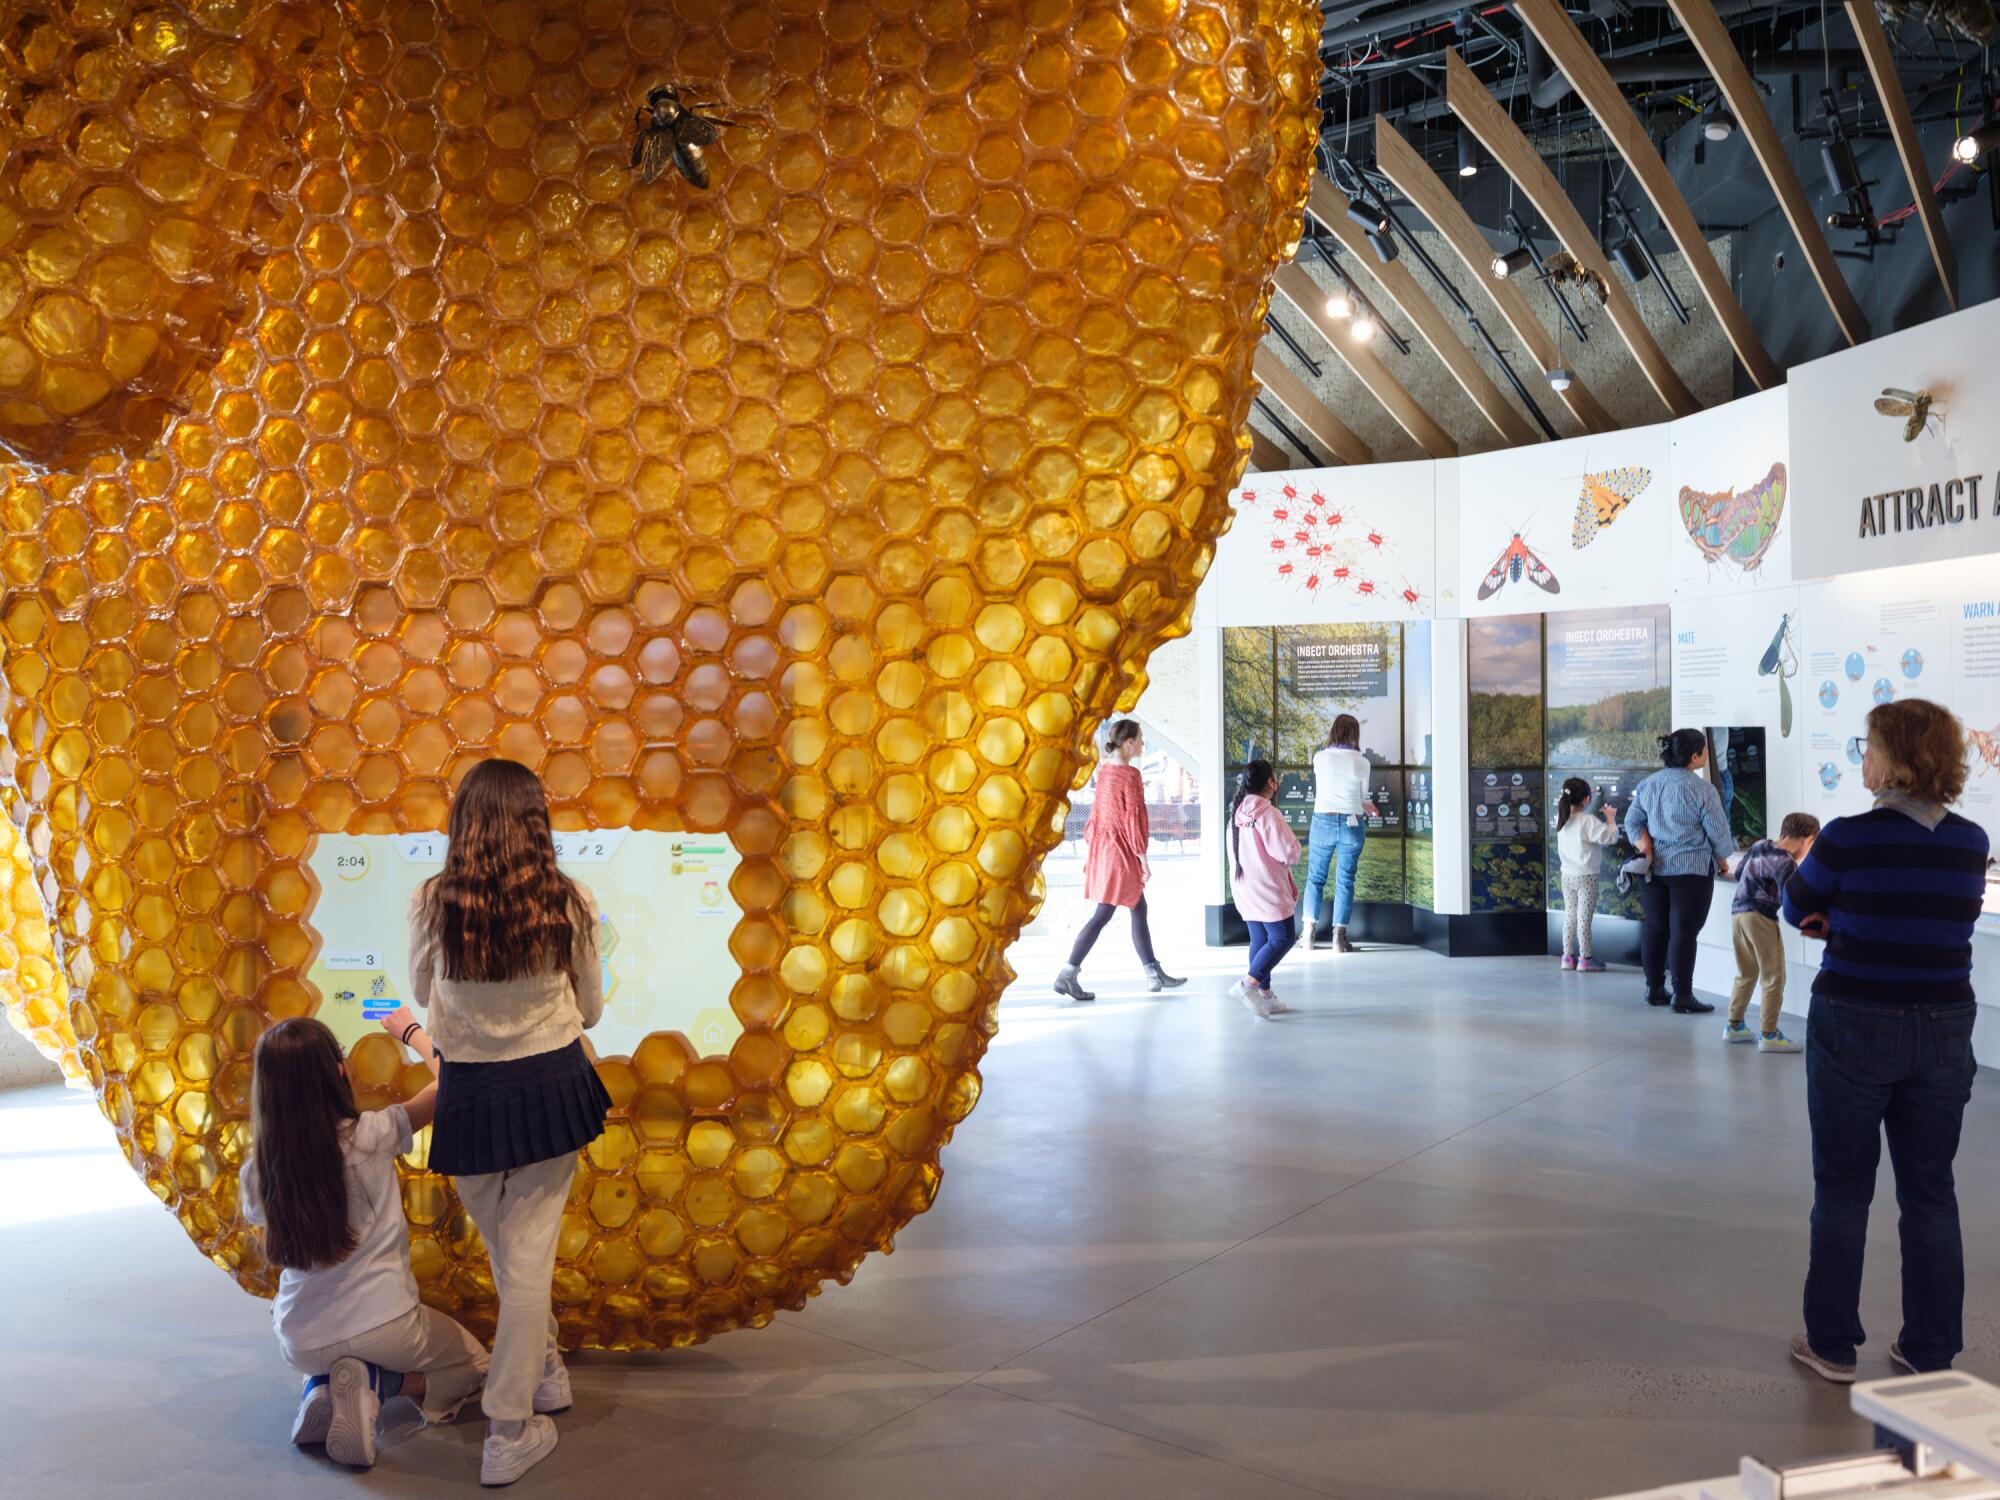 A view of a gallery shows kids standing in front of a monumental model of a bee hive crafted from resin.